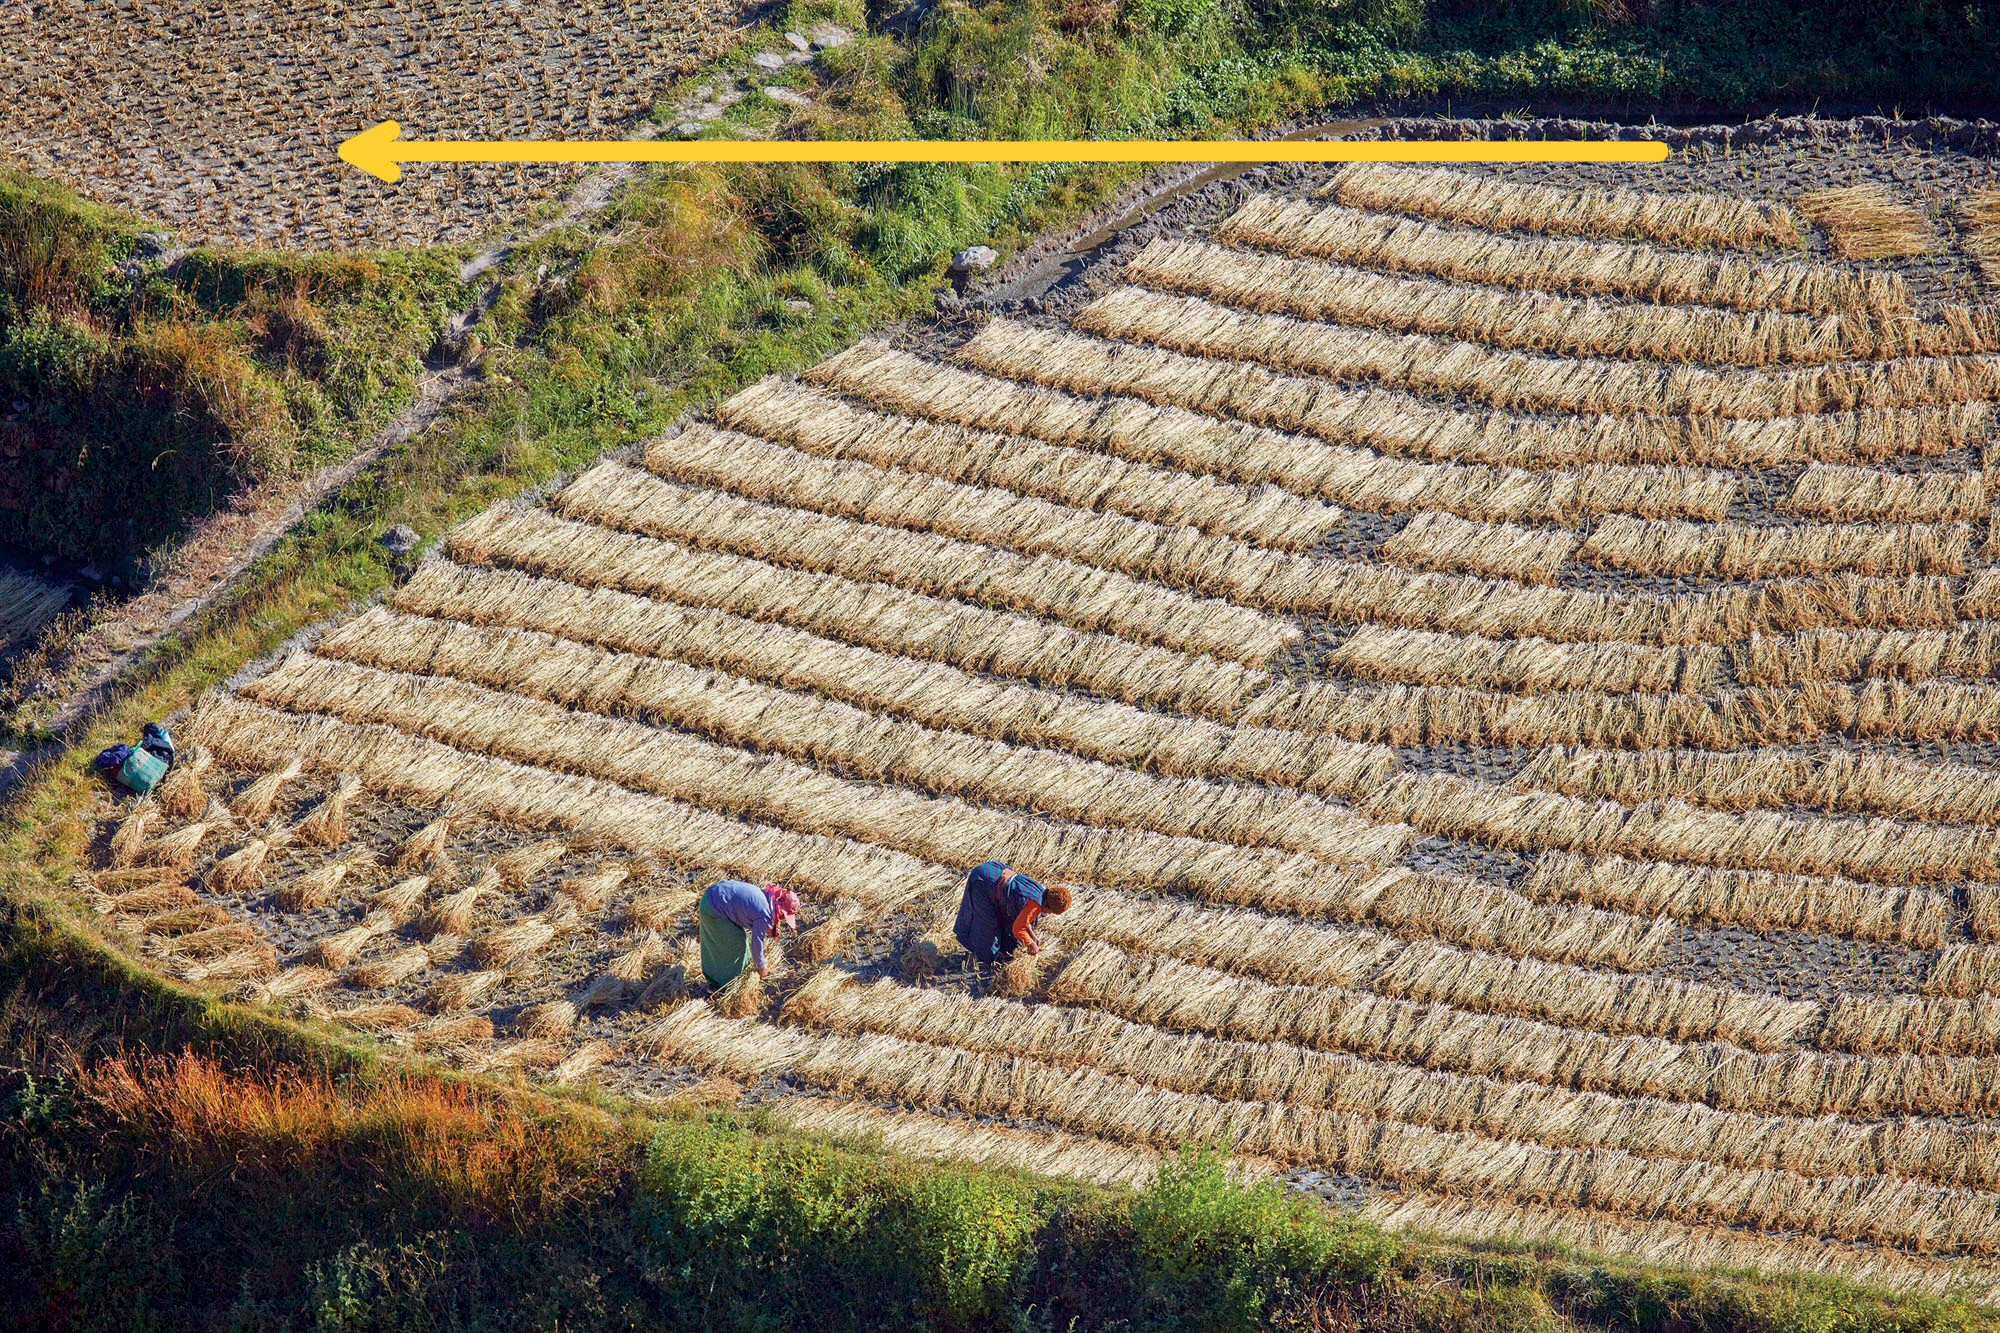 The pattern of the drying crops is a positive, but the pattern stops in the top left corner and so the effect is diminished.